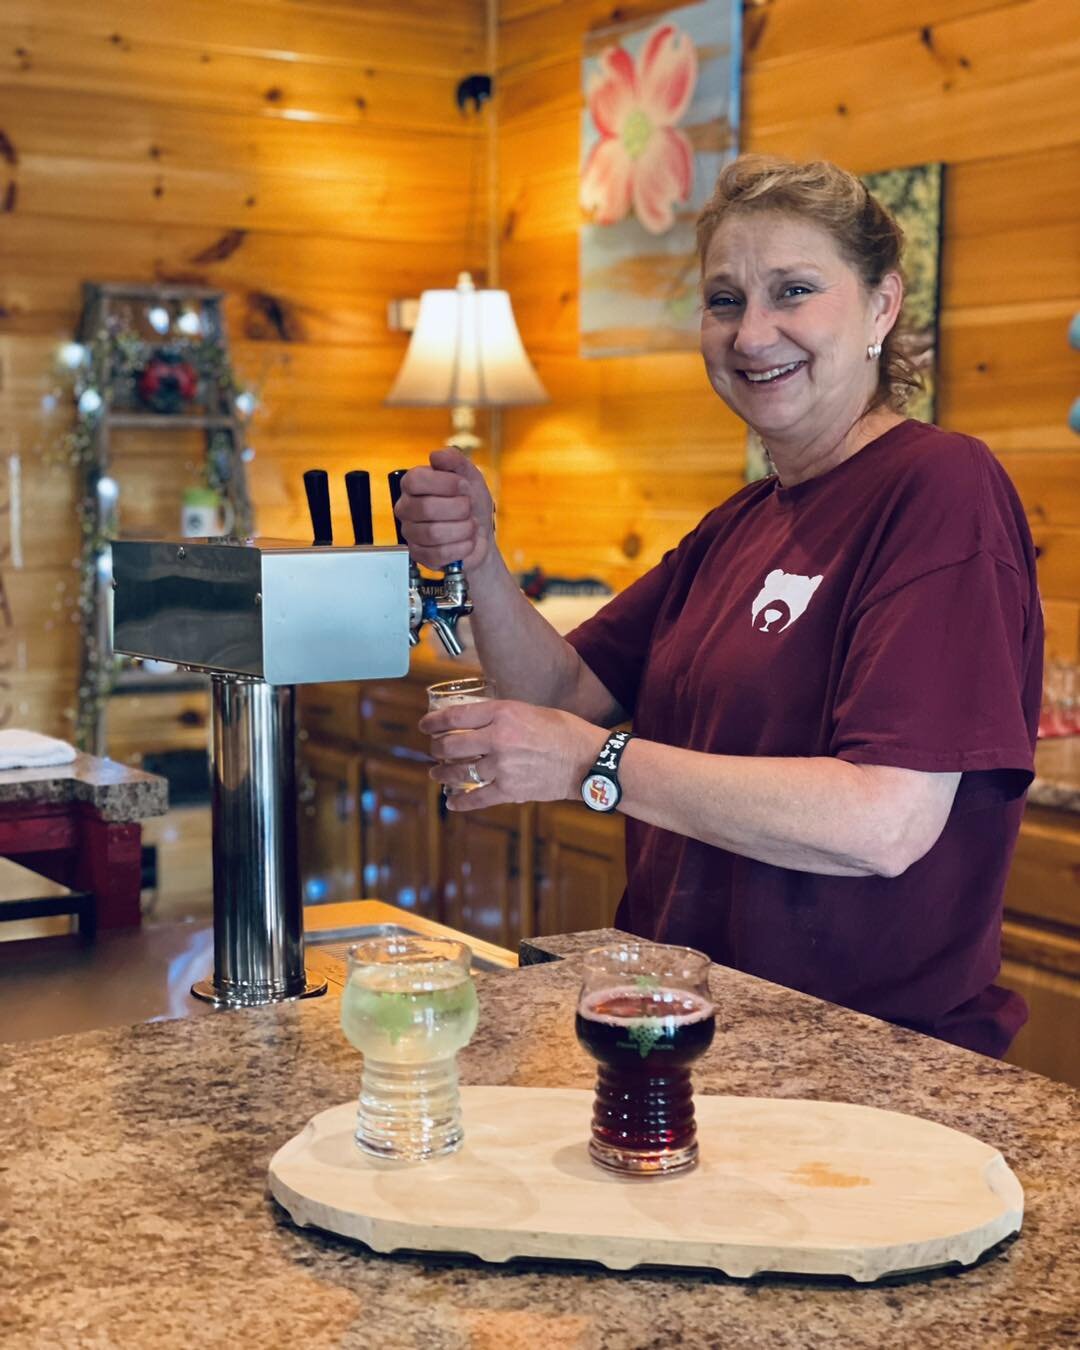 🥳Cider Flights await you!🥳

🍍🍎🍏🫐🍓

🎉Apple, Pineapple, and Blackberry are currently on tap! 

#cadescovecellars #cadescovecellarswearsvalley #greatsmokymountains #cider #hardcider #gatlinburg #freetasting #ciderflight